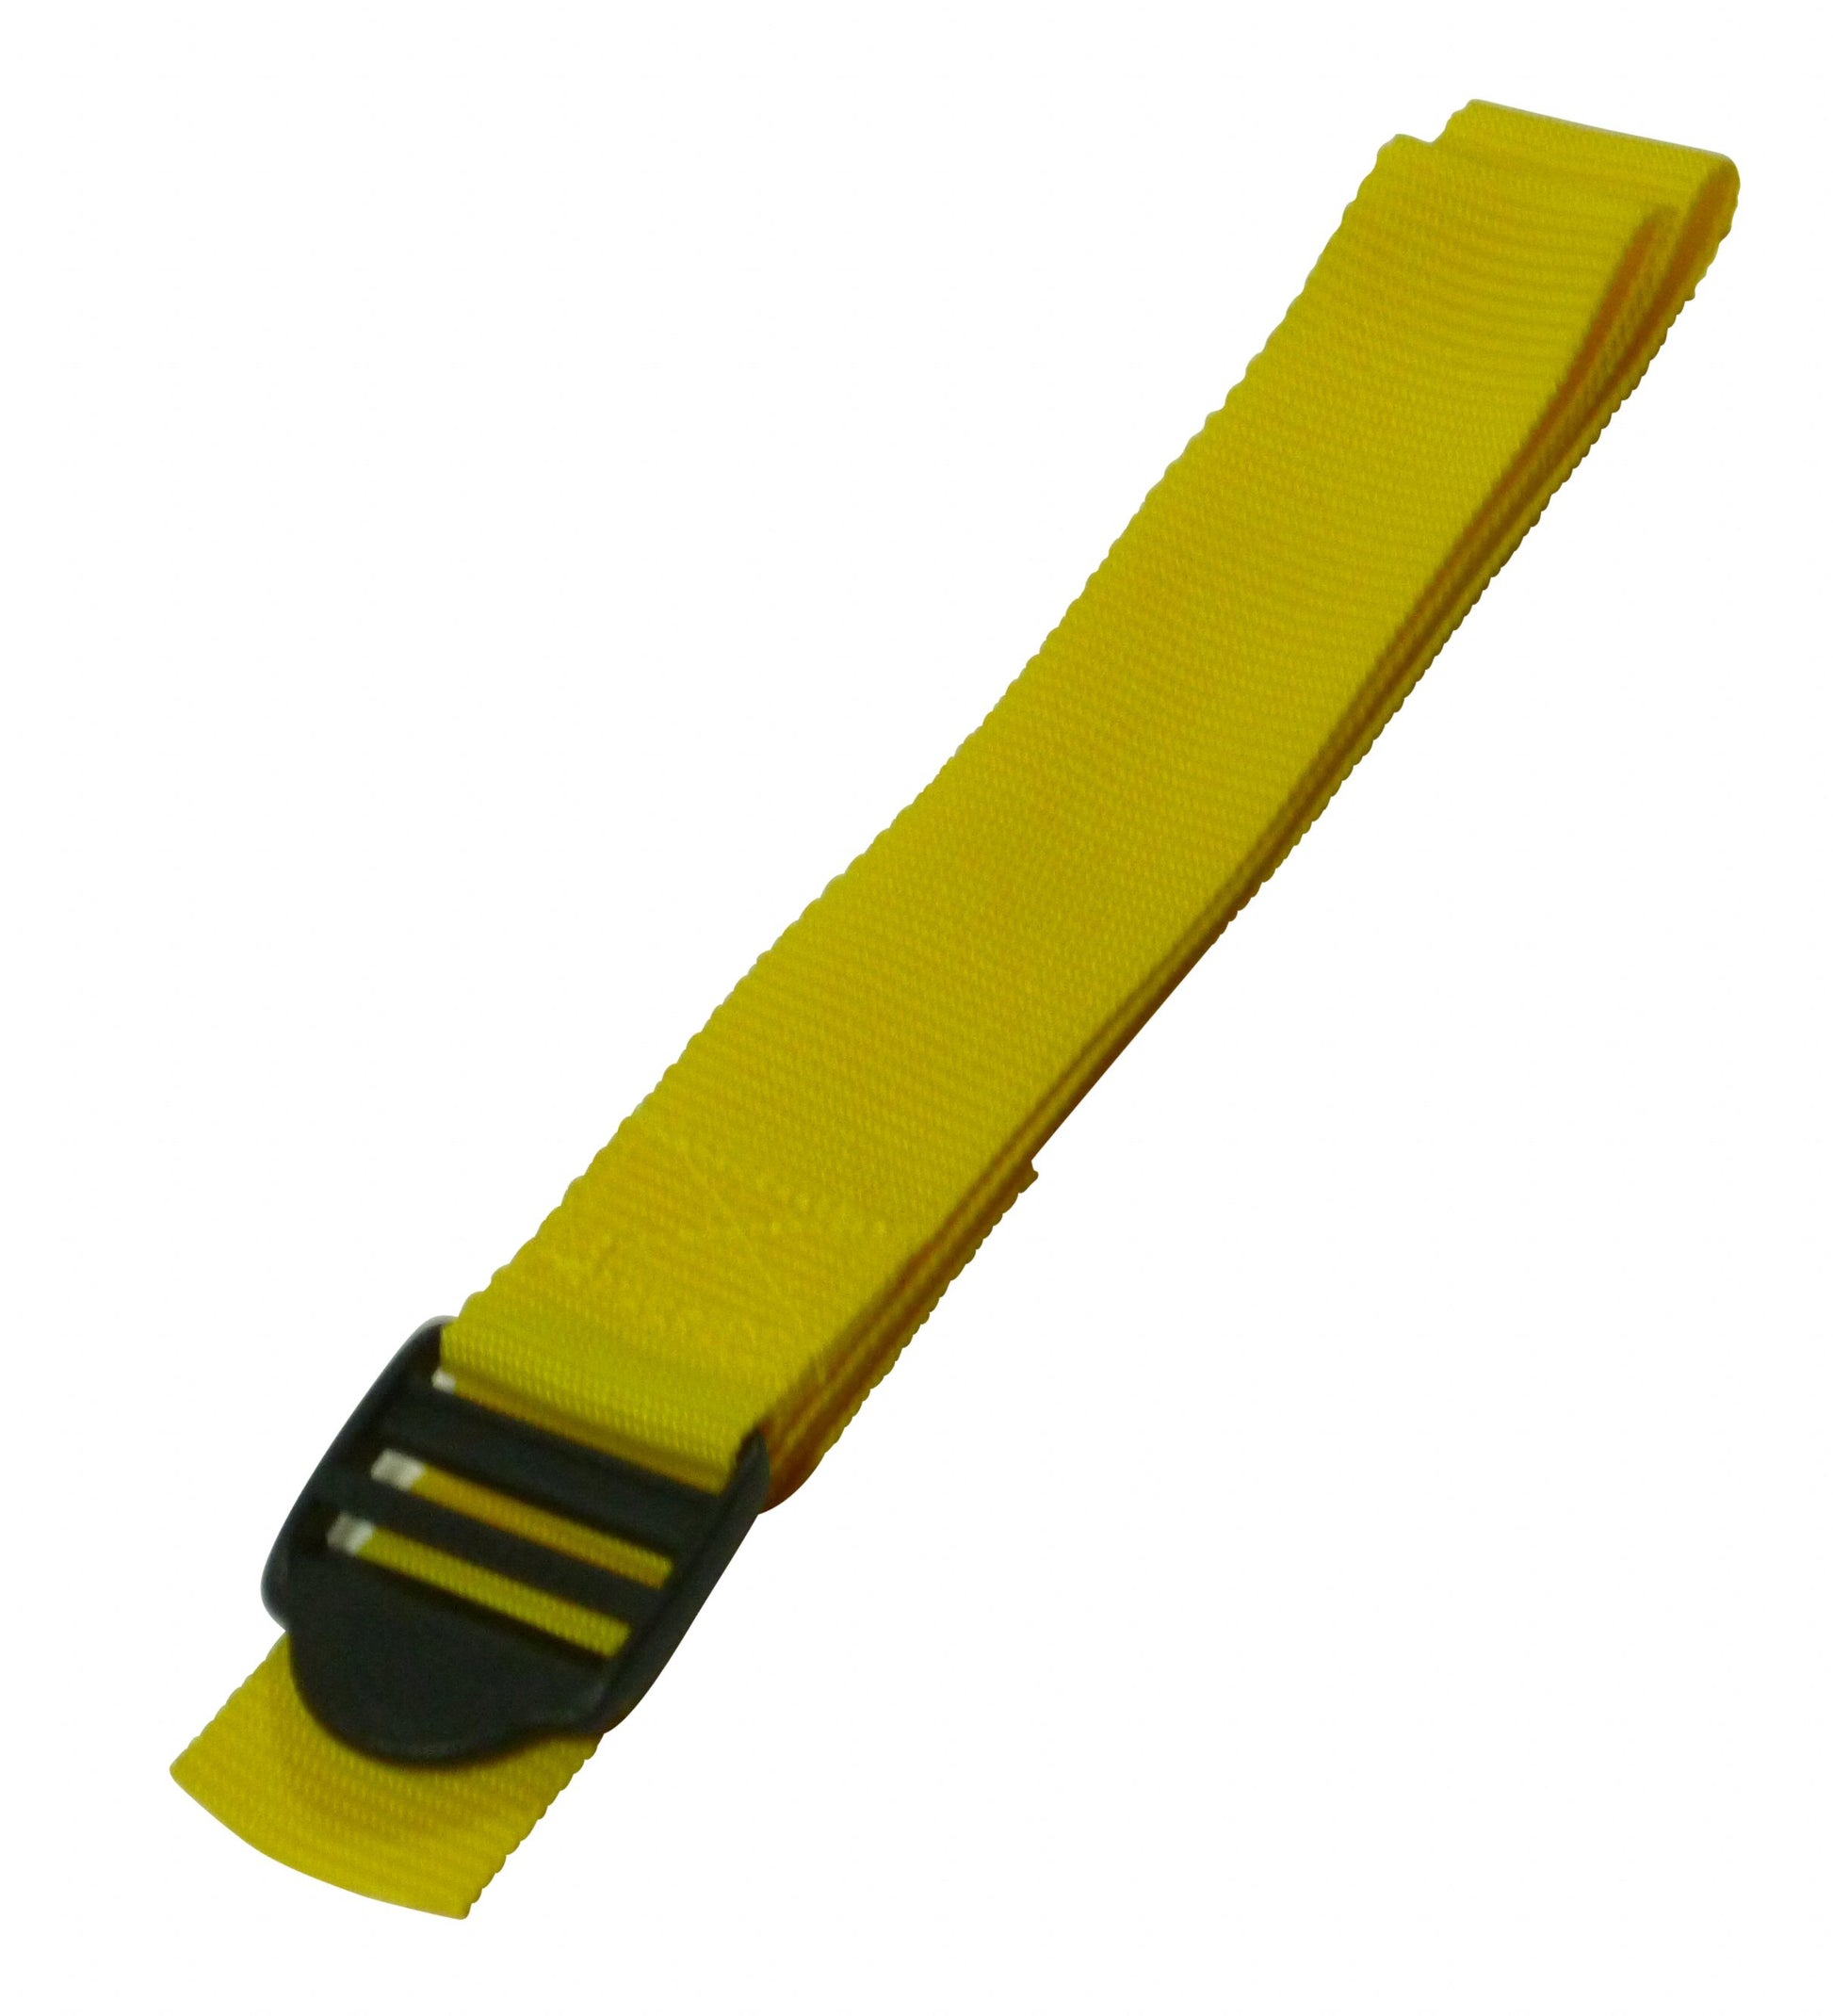 Benristraps 38mm Webbing Strap with Ladderlock Buckle in yellow